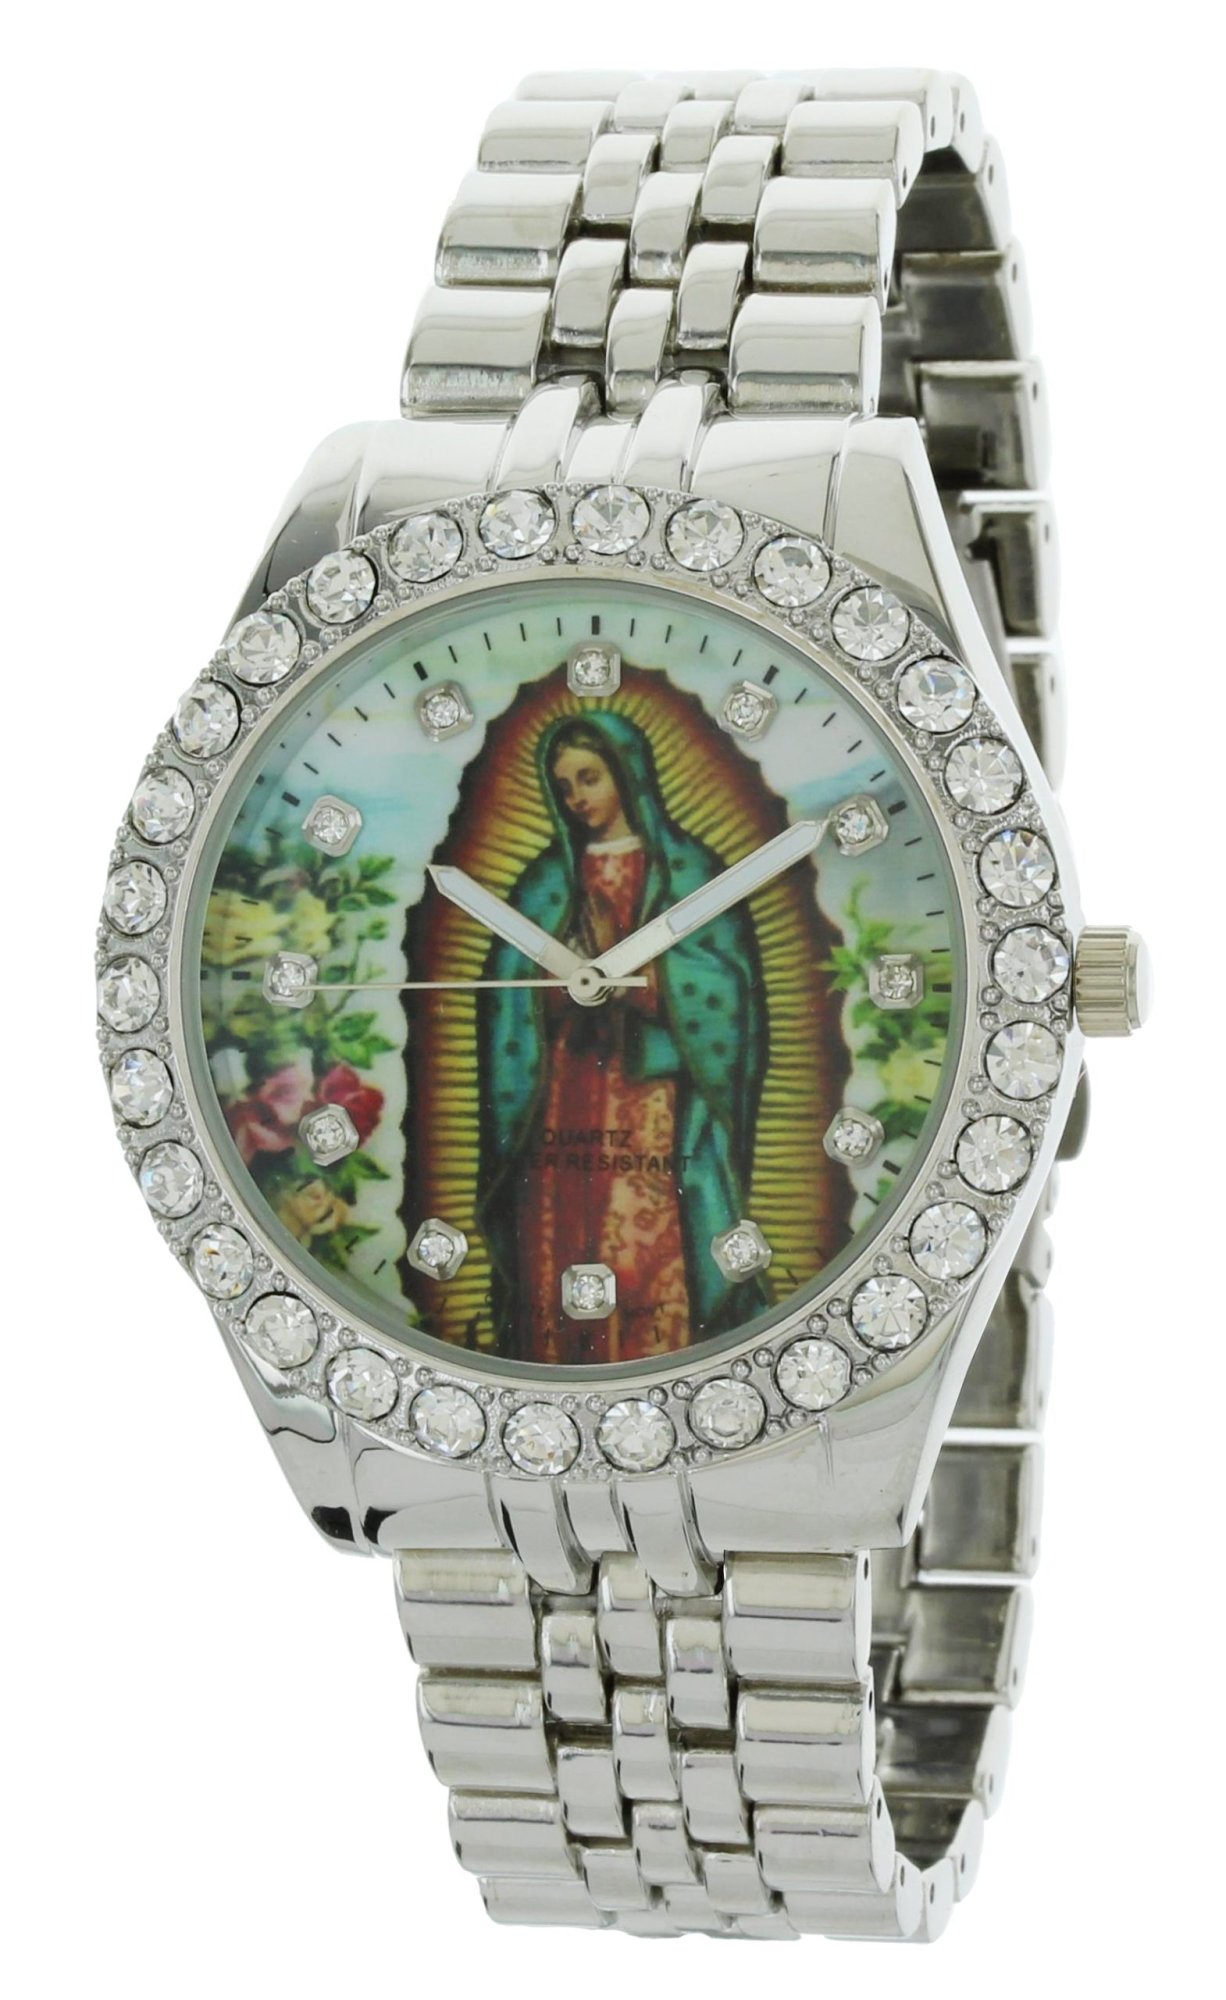 Model: Our Lady of Guadalupe Silver-Tone Metal Bracelet Watch with Neckless and Cross Pendent Set